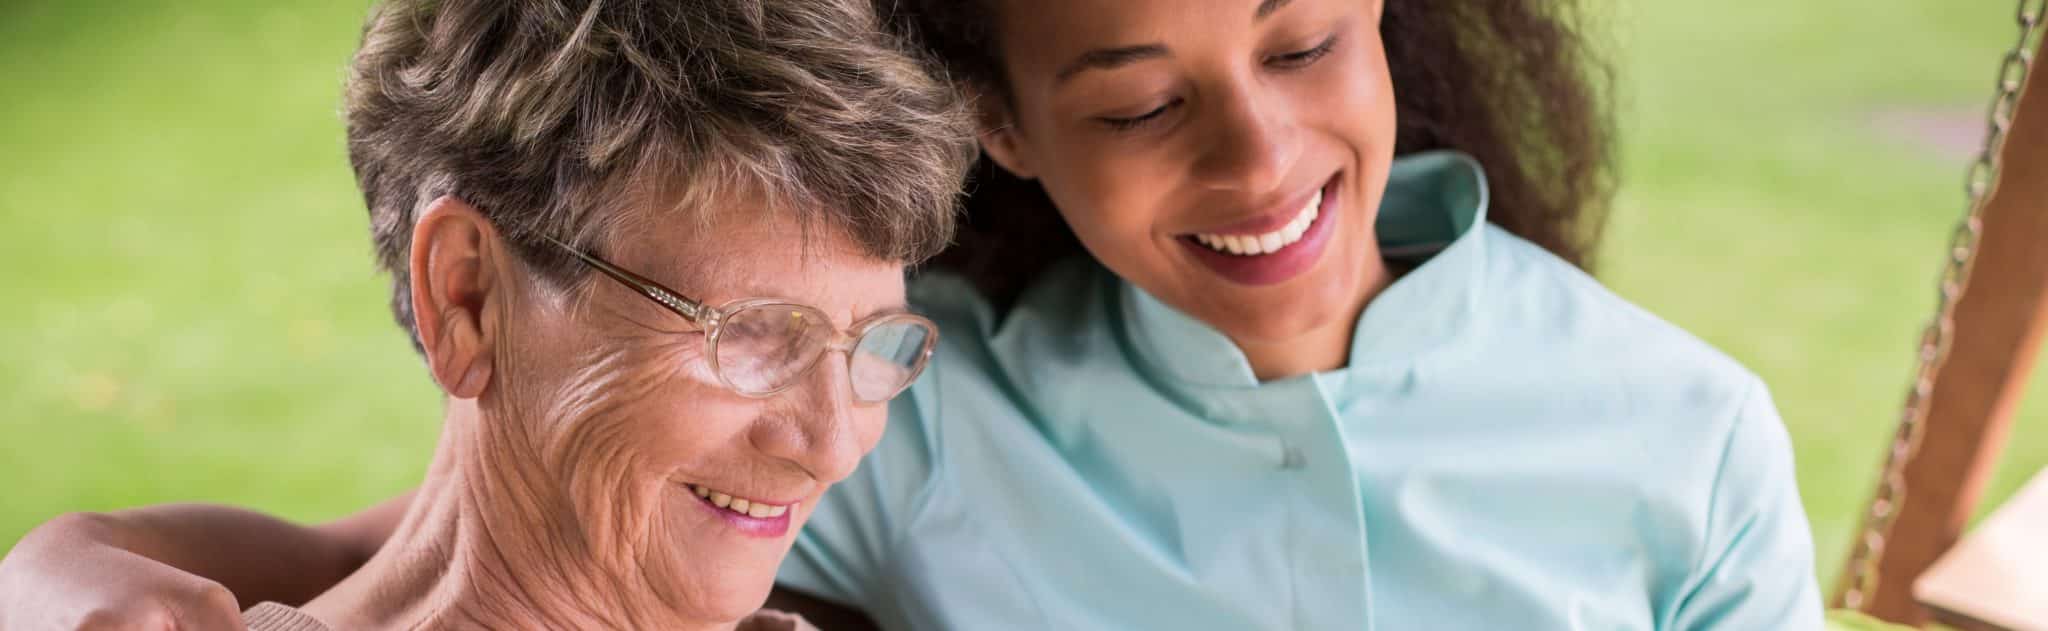 About United Methodist Communities Home Care Agency For NJ Seniors